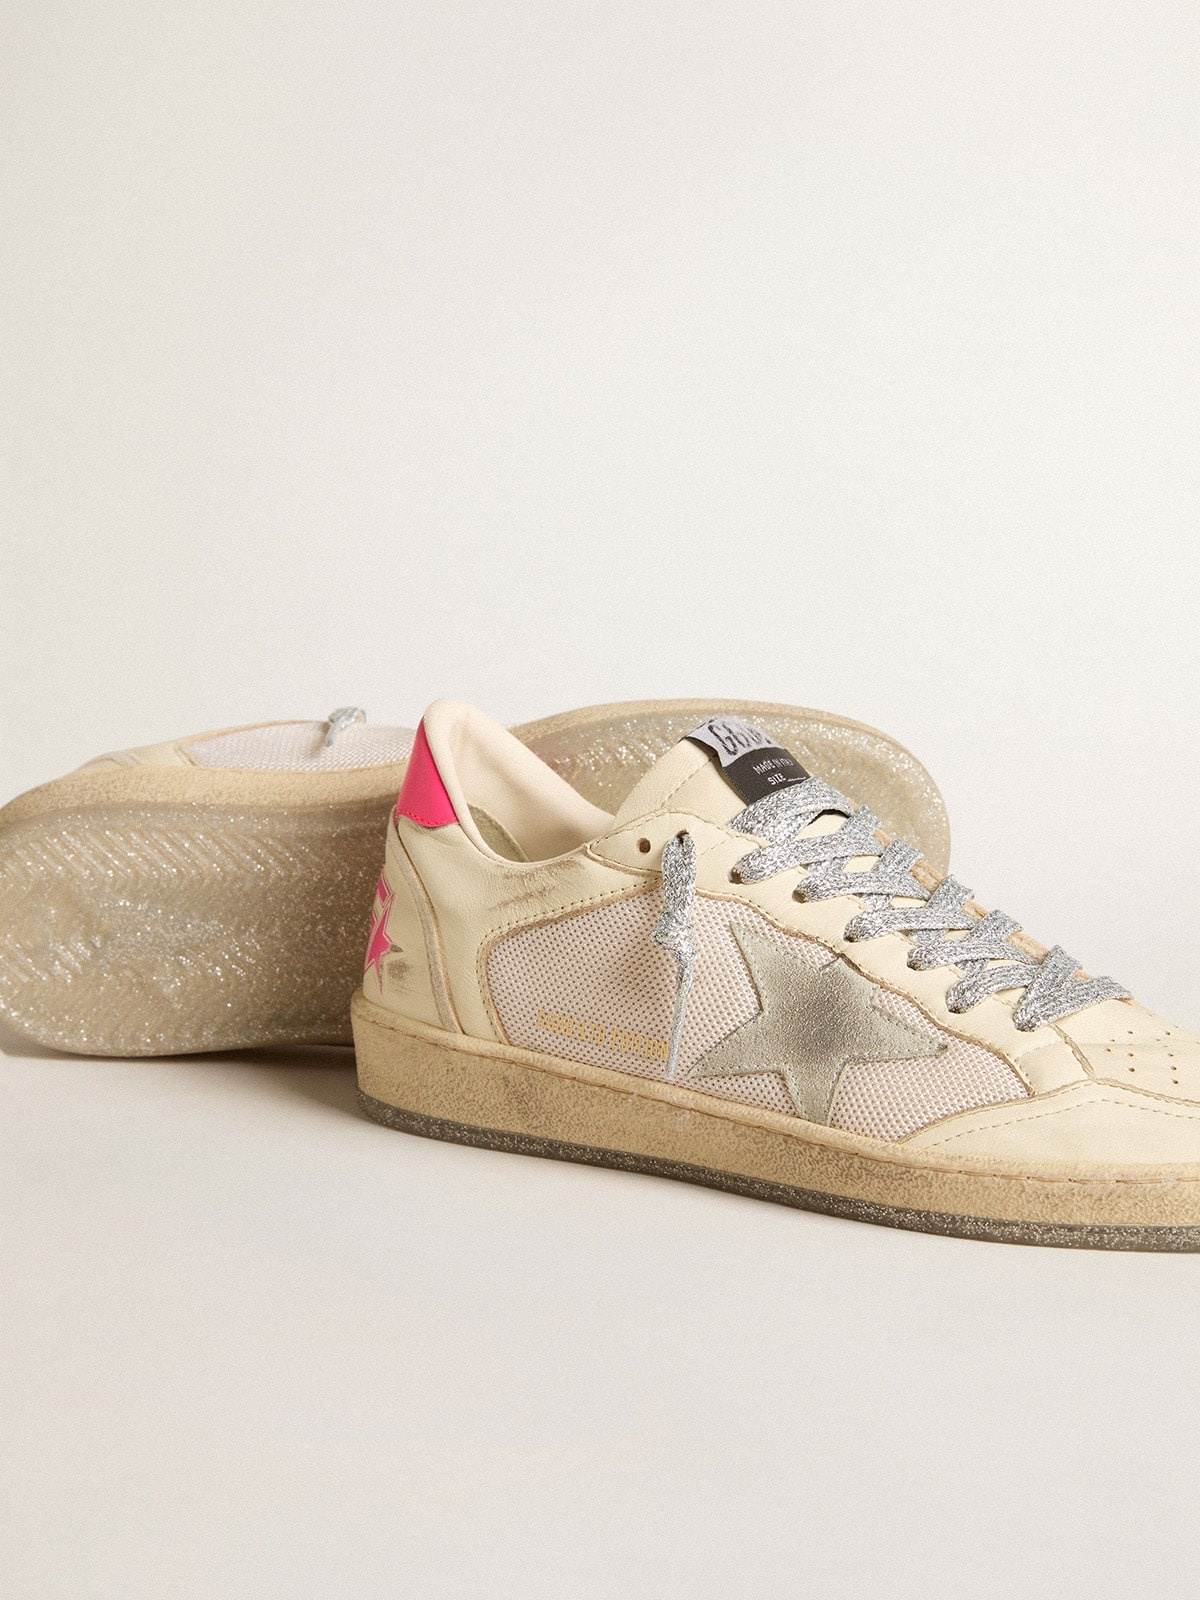 Ball Star LTD in nappa leather and mesh with suede star and leather heel tab - 3